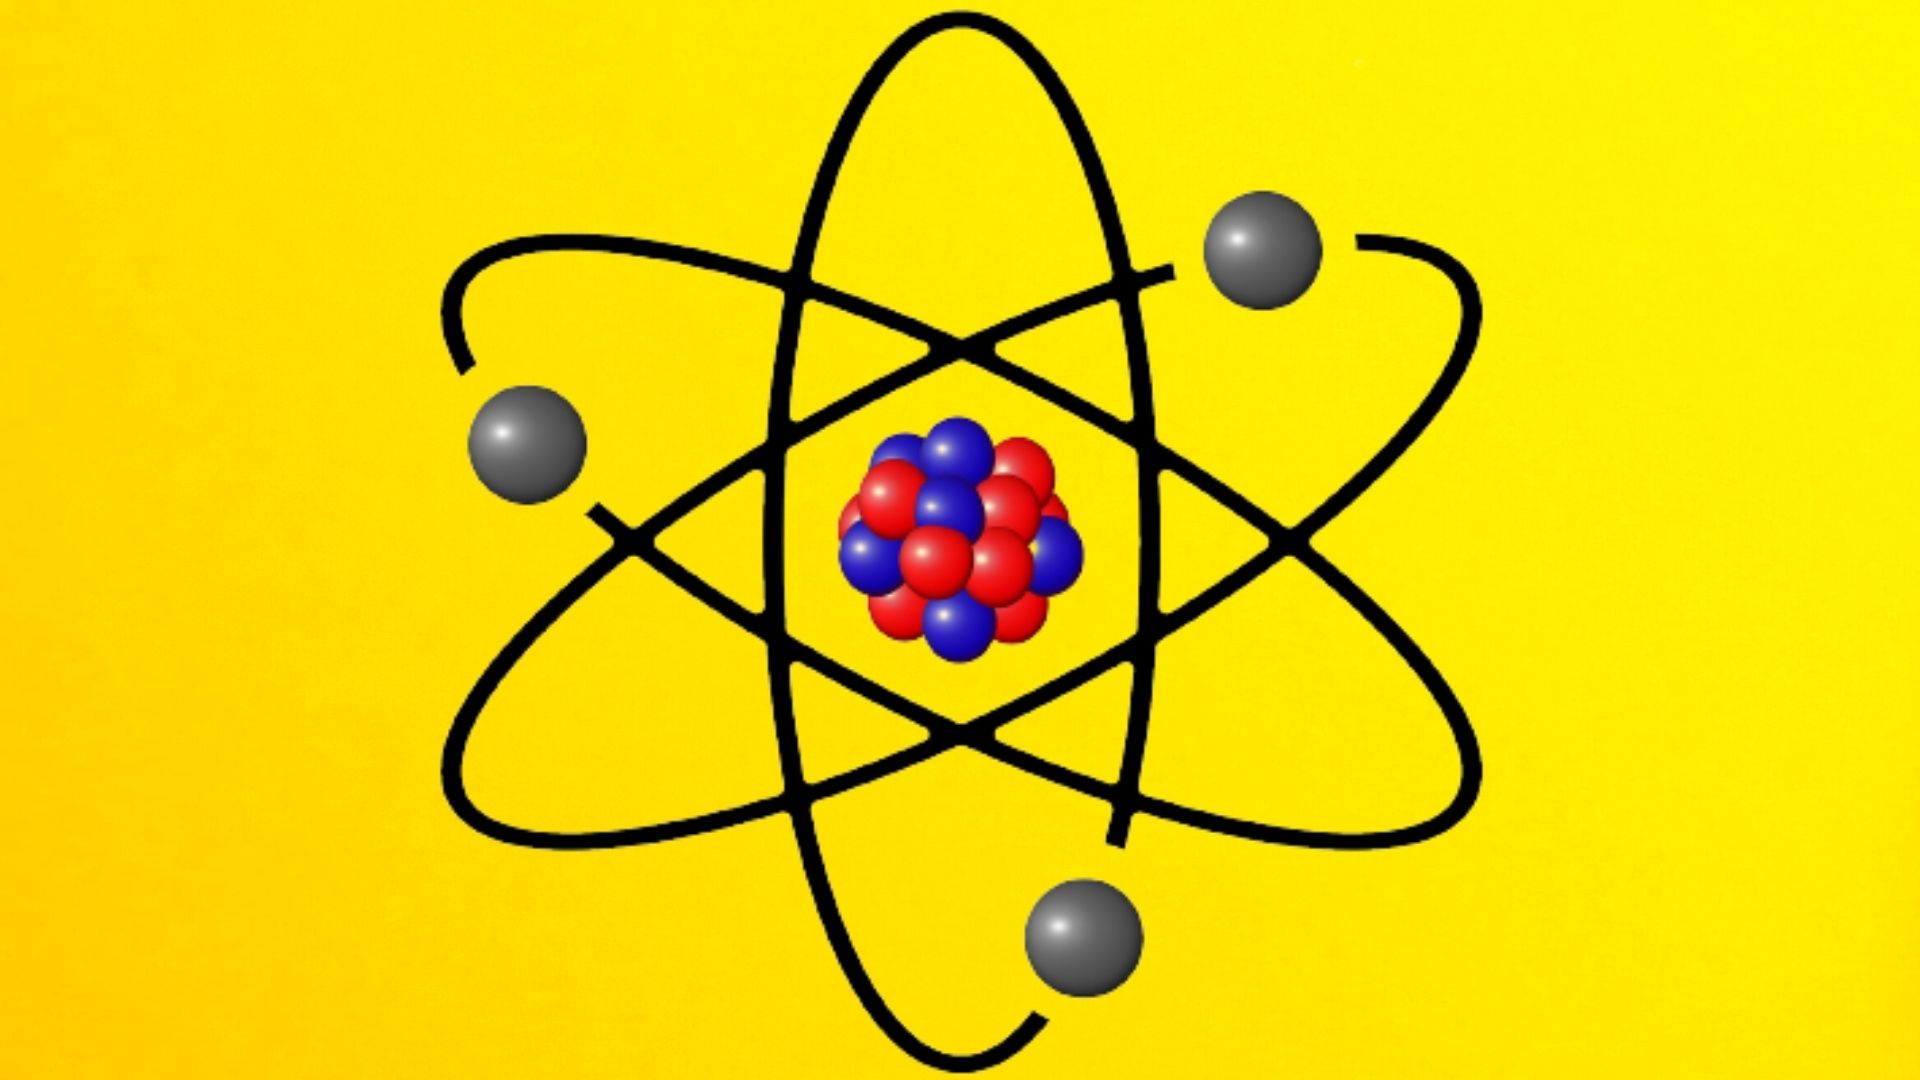 10 Mind-blowing Facts About Electrons You Need To Know